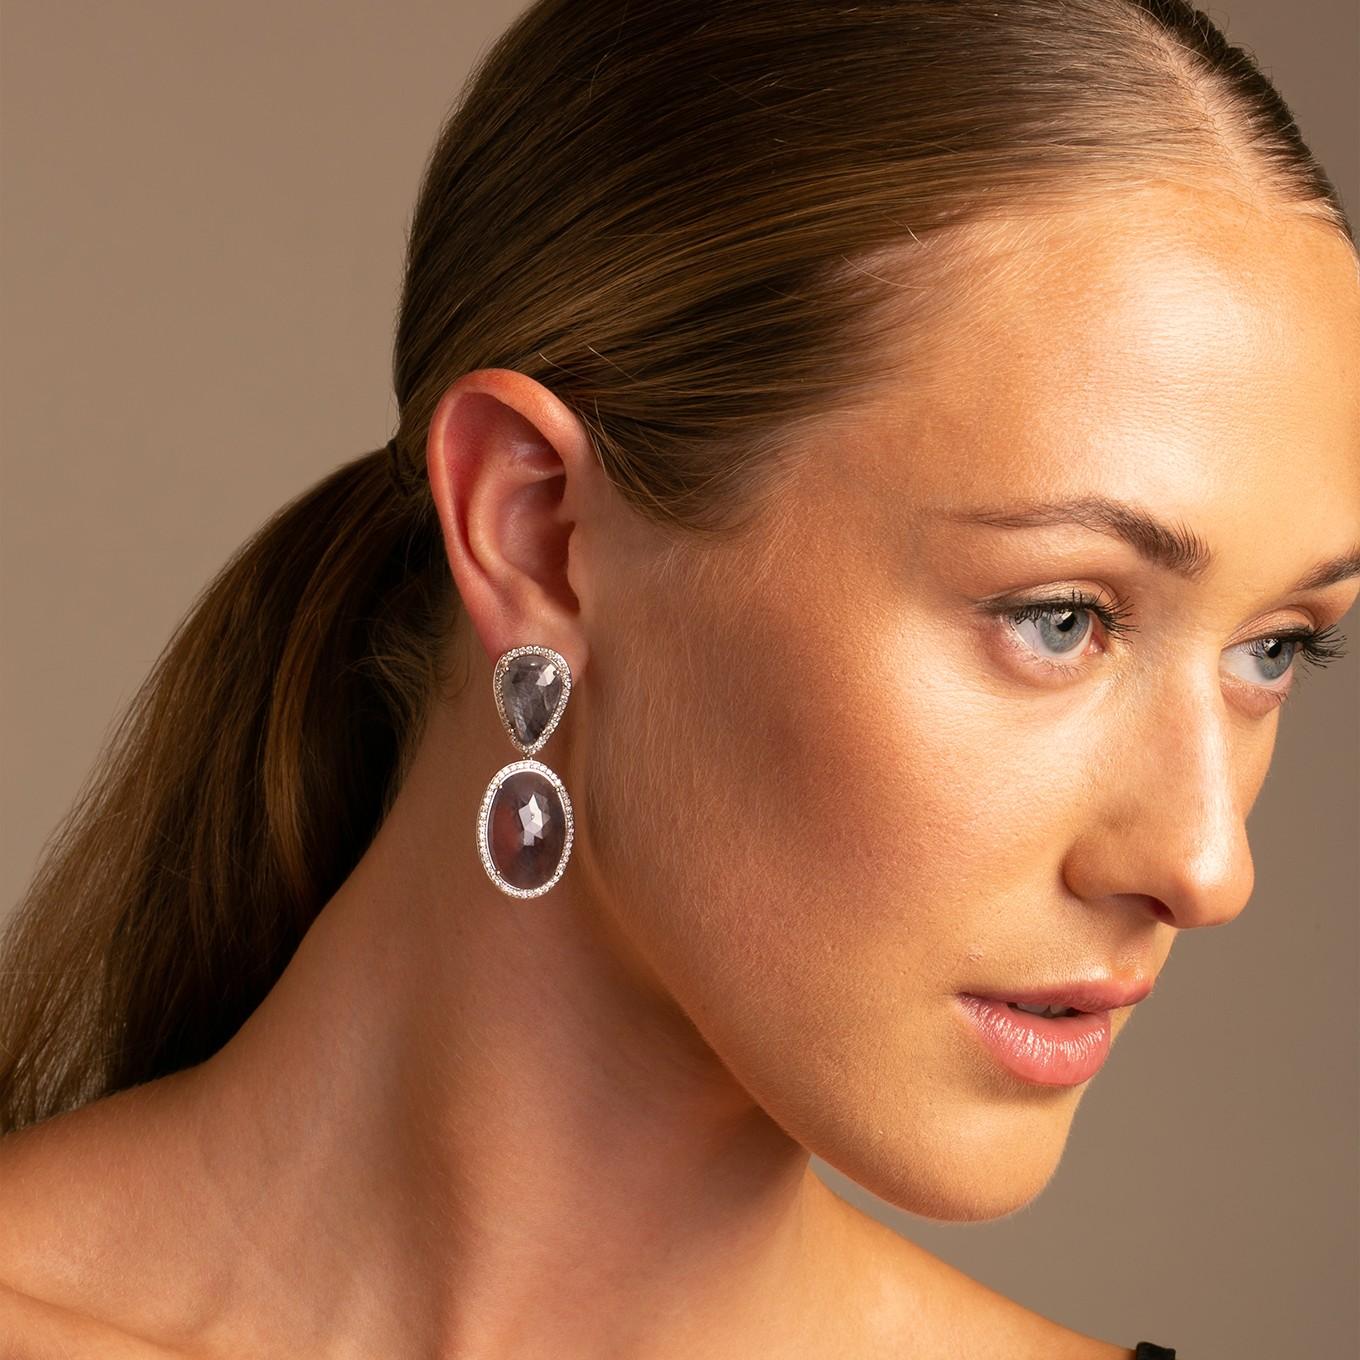 One of a Kind natural sapphire slice earrings.
These stunning earrings are crafted with precision and attention to detail, showcasing the perfect combination of natural beauty and exquisite craftsmanship.

Each earring features a pear-shaped and an